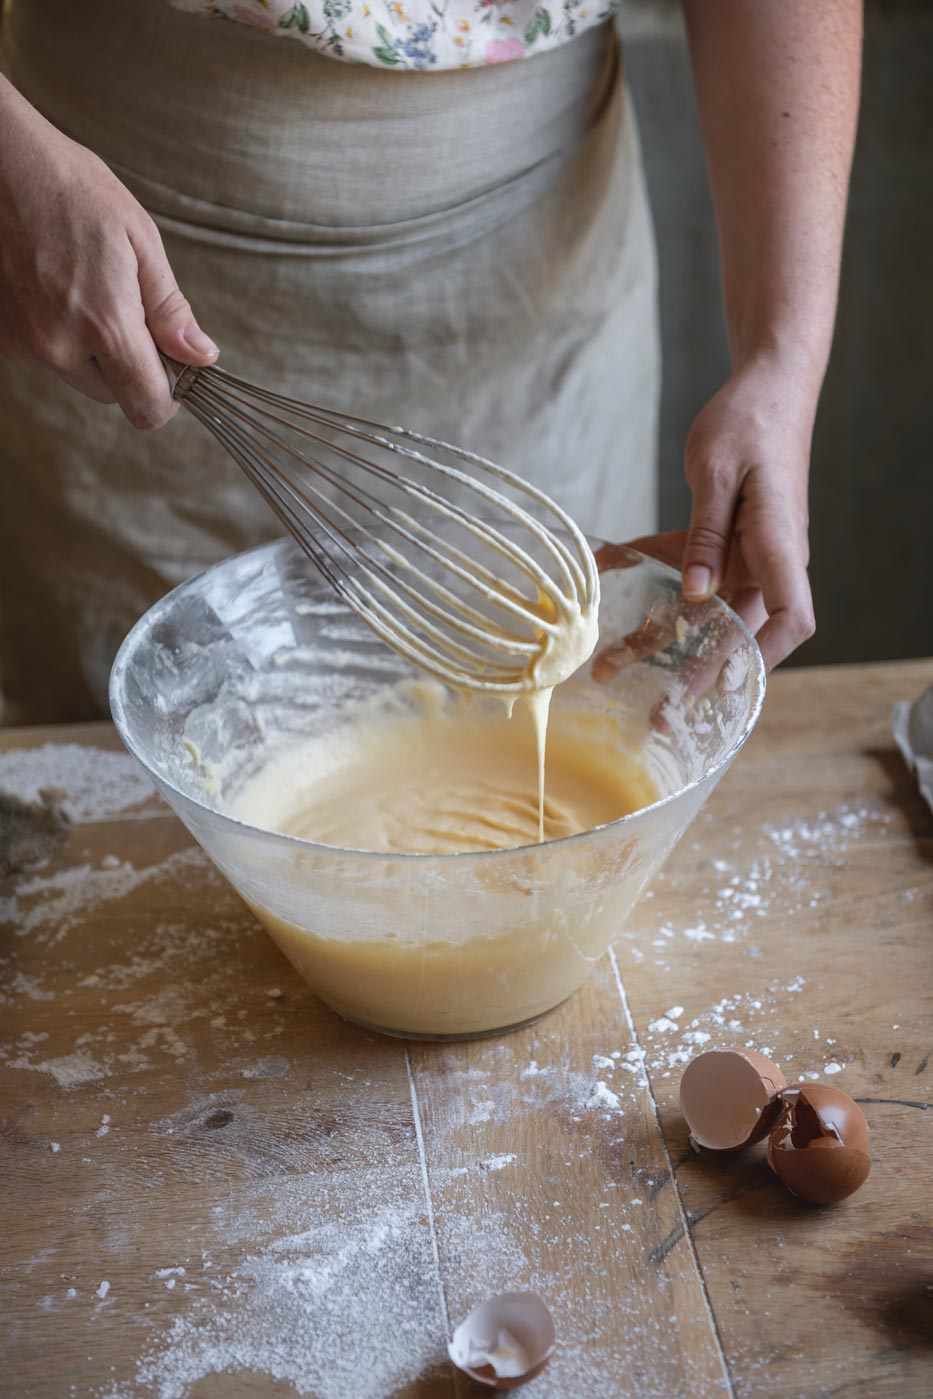 Woman mixing batter in a baking bowl